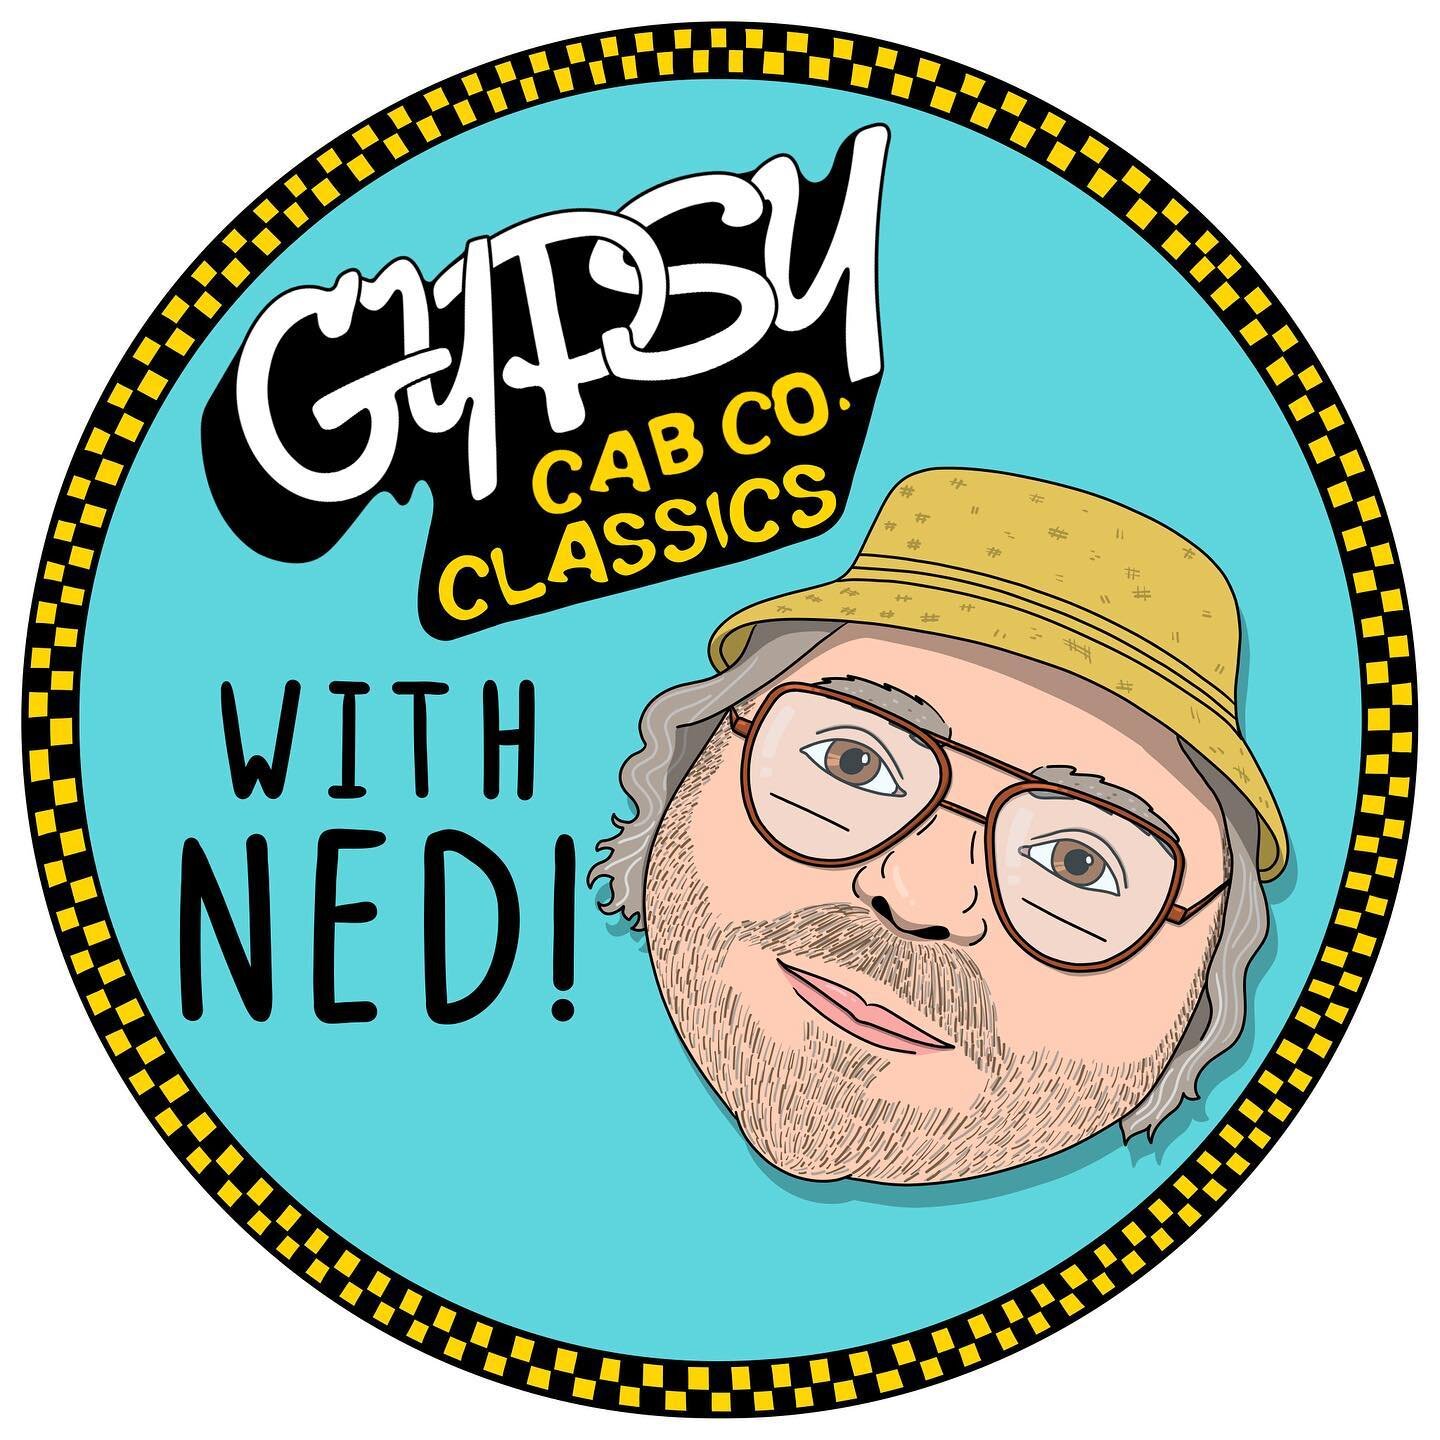 Happy Labor Day! Sharing one of my recent labors for the @gypsycab_sta, a logo for their new YouTube series, where the famous Ned cooks up some Gypsy classics 😋 Definitely worth a watch! 🚕 
.
.
.
.
.
#cjinwonderland #carolinejbrown #gypsycab #staug